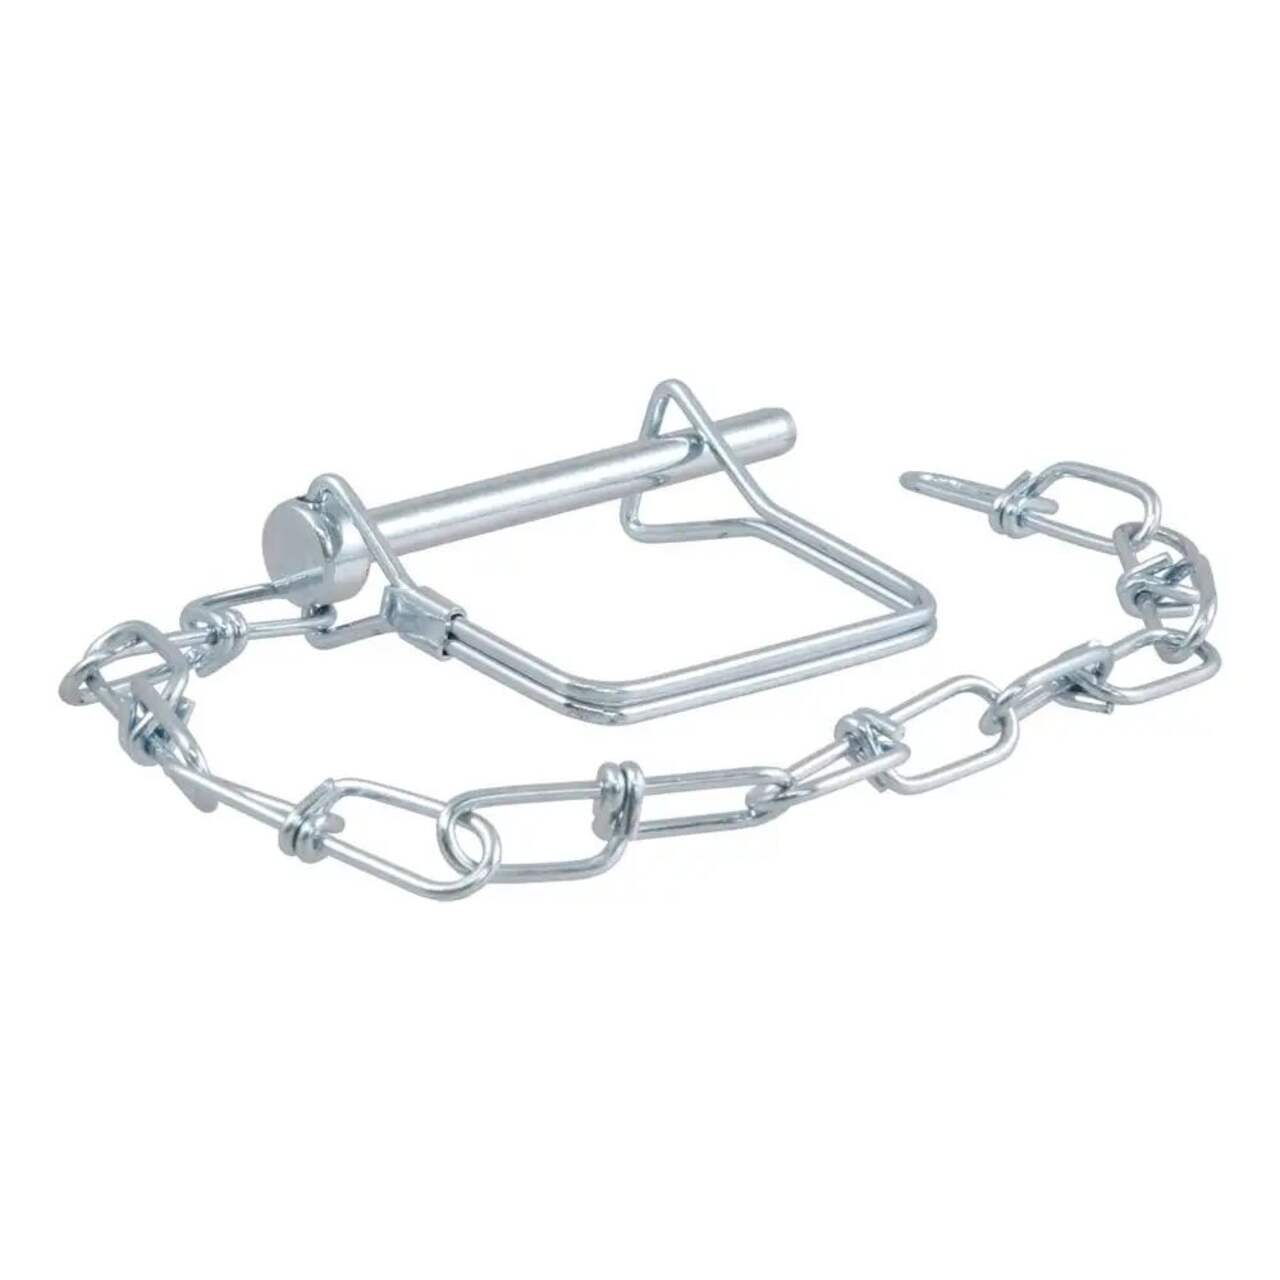 https://media-www.canadiantire.ca/product/automotive/automotive-outdoor-adventure/auto-travel-storage/1405916/1-4-safety-pin-with-12-chain-2-3-4-pin-length-packaged--effabc6b-89ec-4c43-b06e-30863dd2161d-jpgrendition.jpg?imdensity=1&imwidth=640&impolicy=mZoom